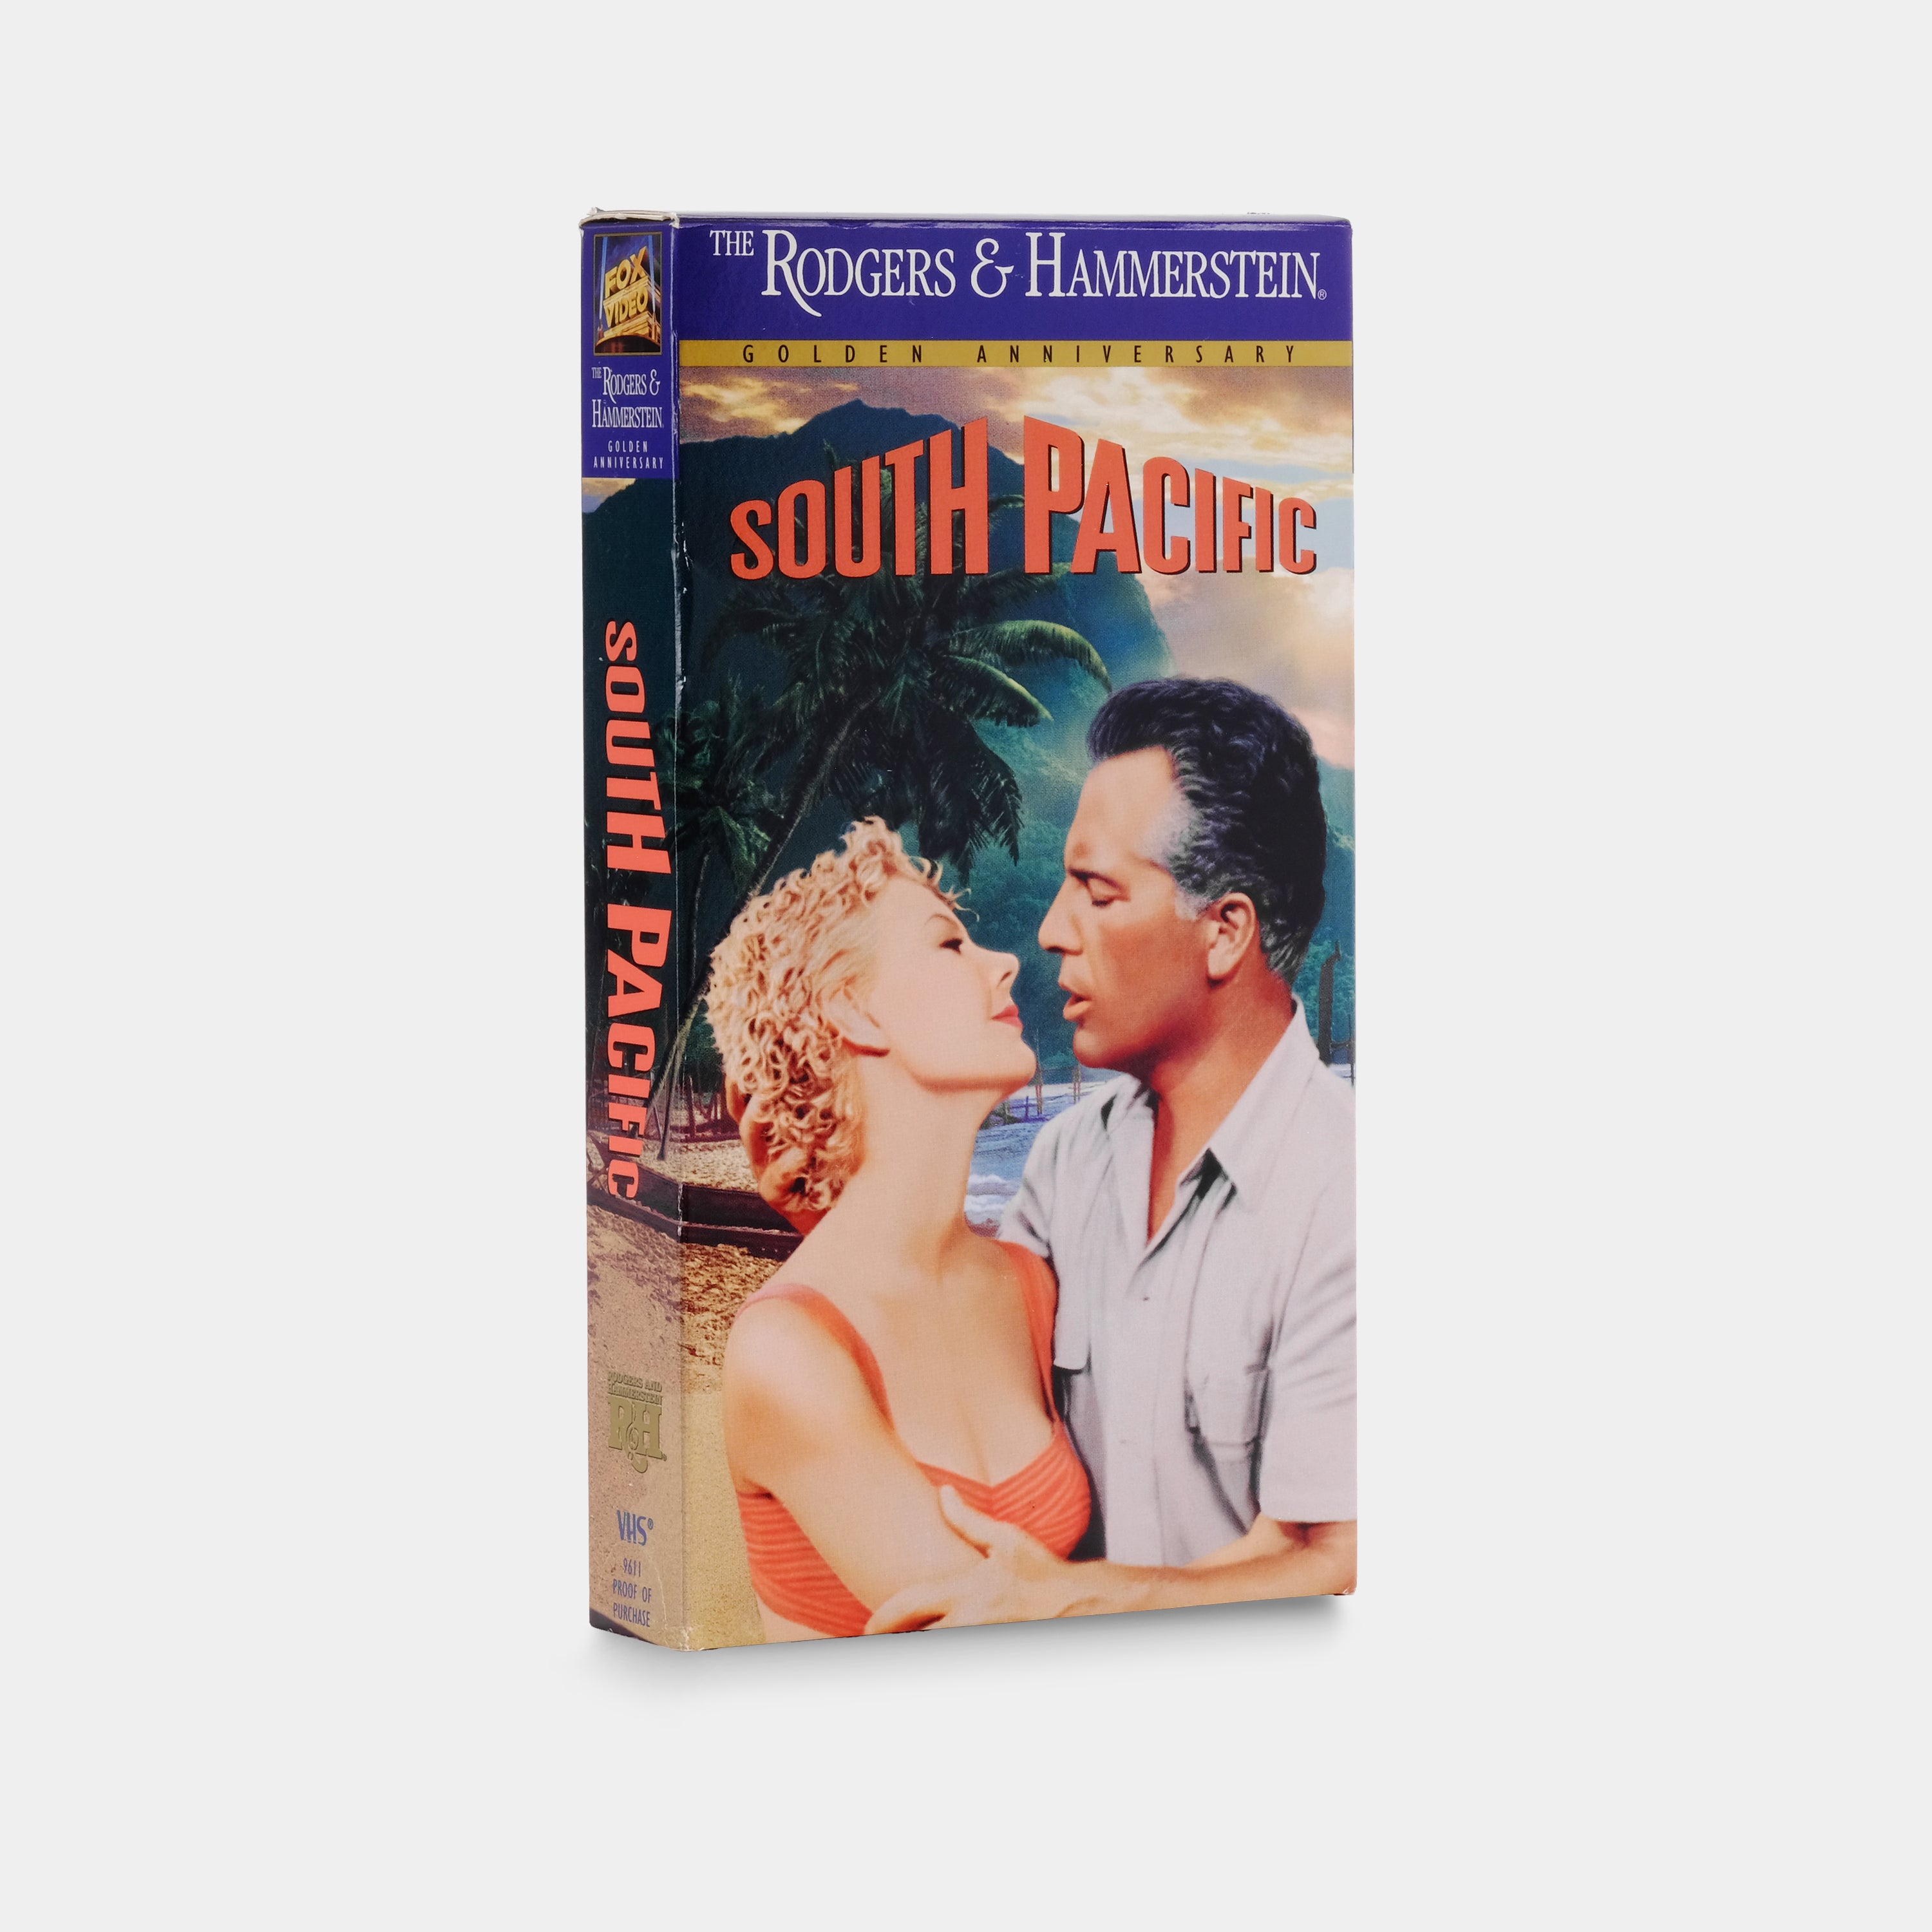 South Pacific VHS Tape